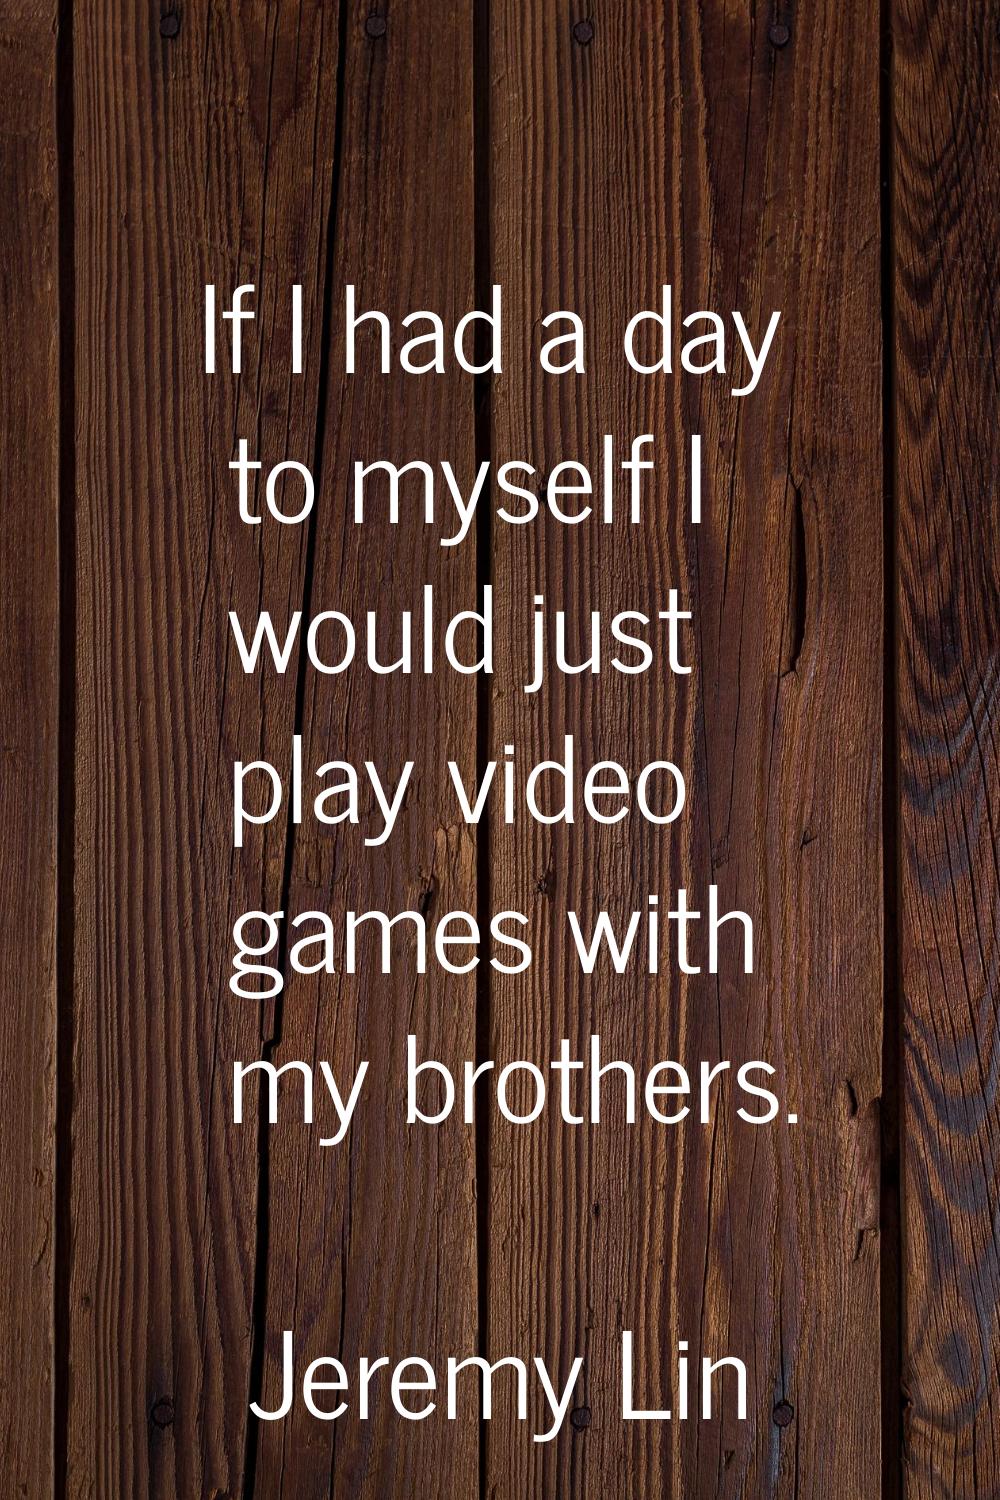 If I had a day to myself I would just play video games with my brothers.